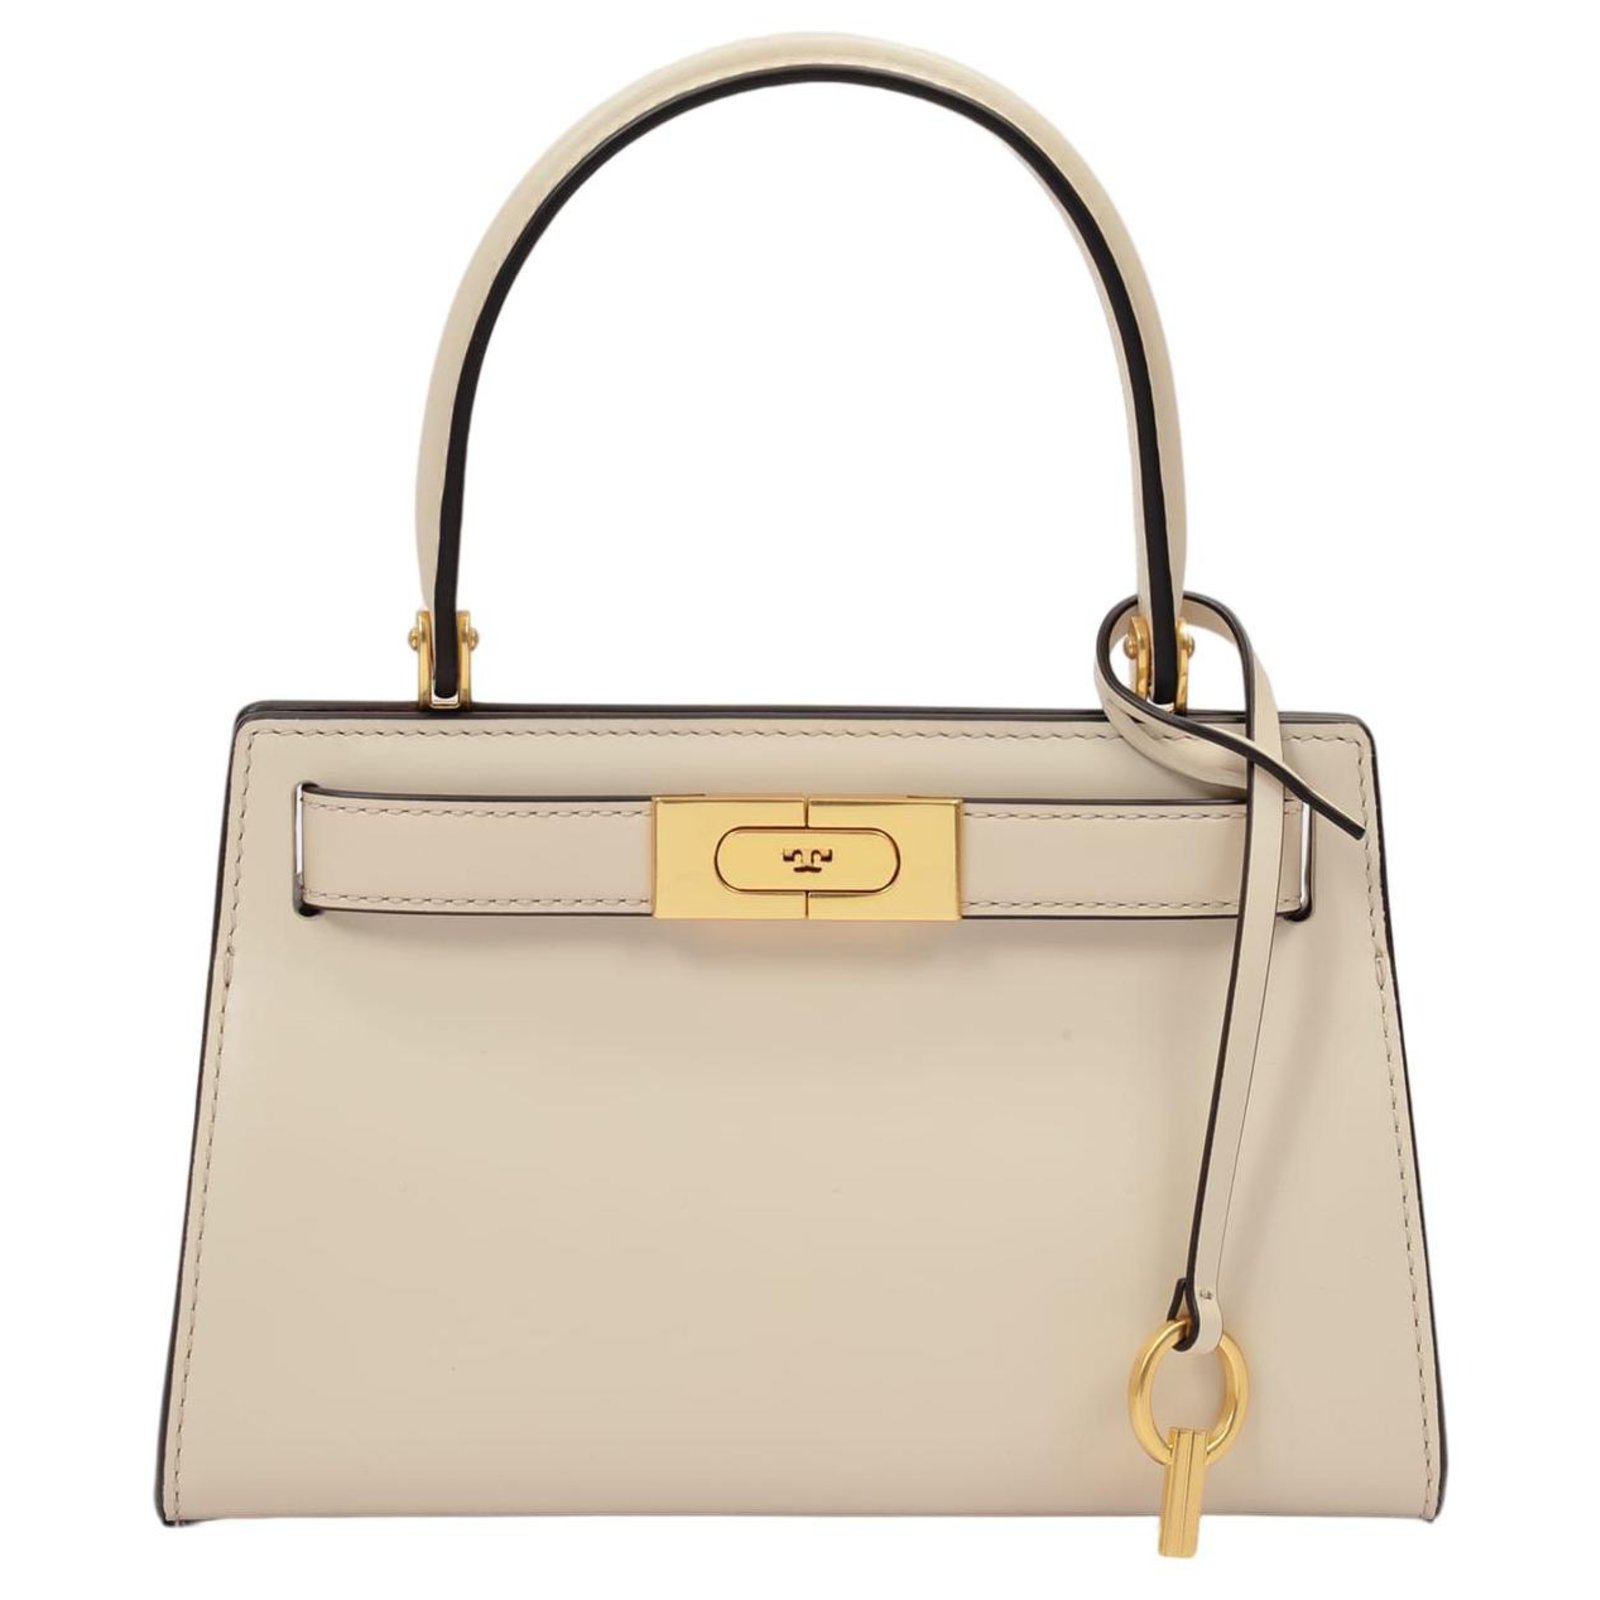 Tory Burch Small Lee Radziwill Leather Double Bag in New Cream